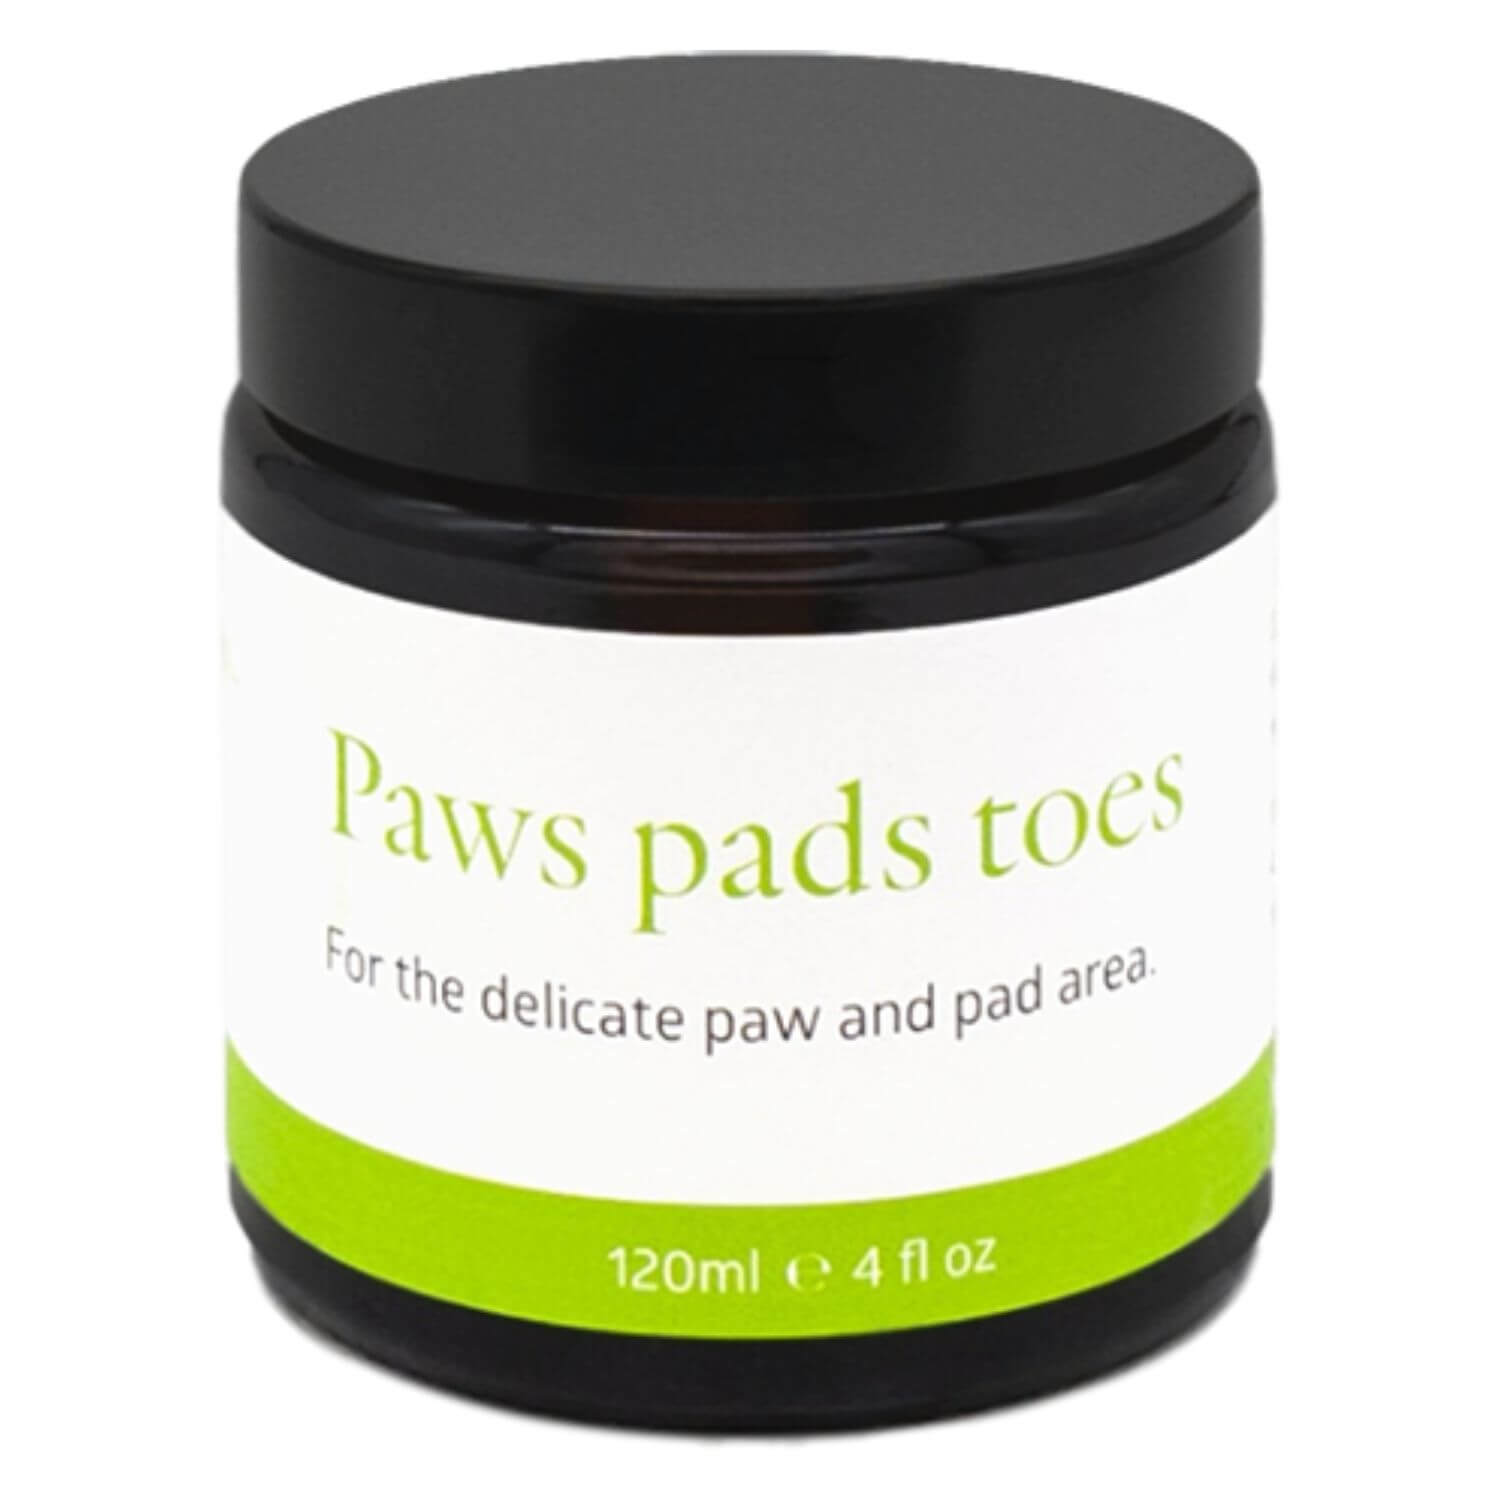 Herbal Pet Supplies | Paws Pads Toes